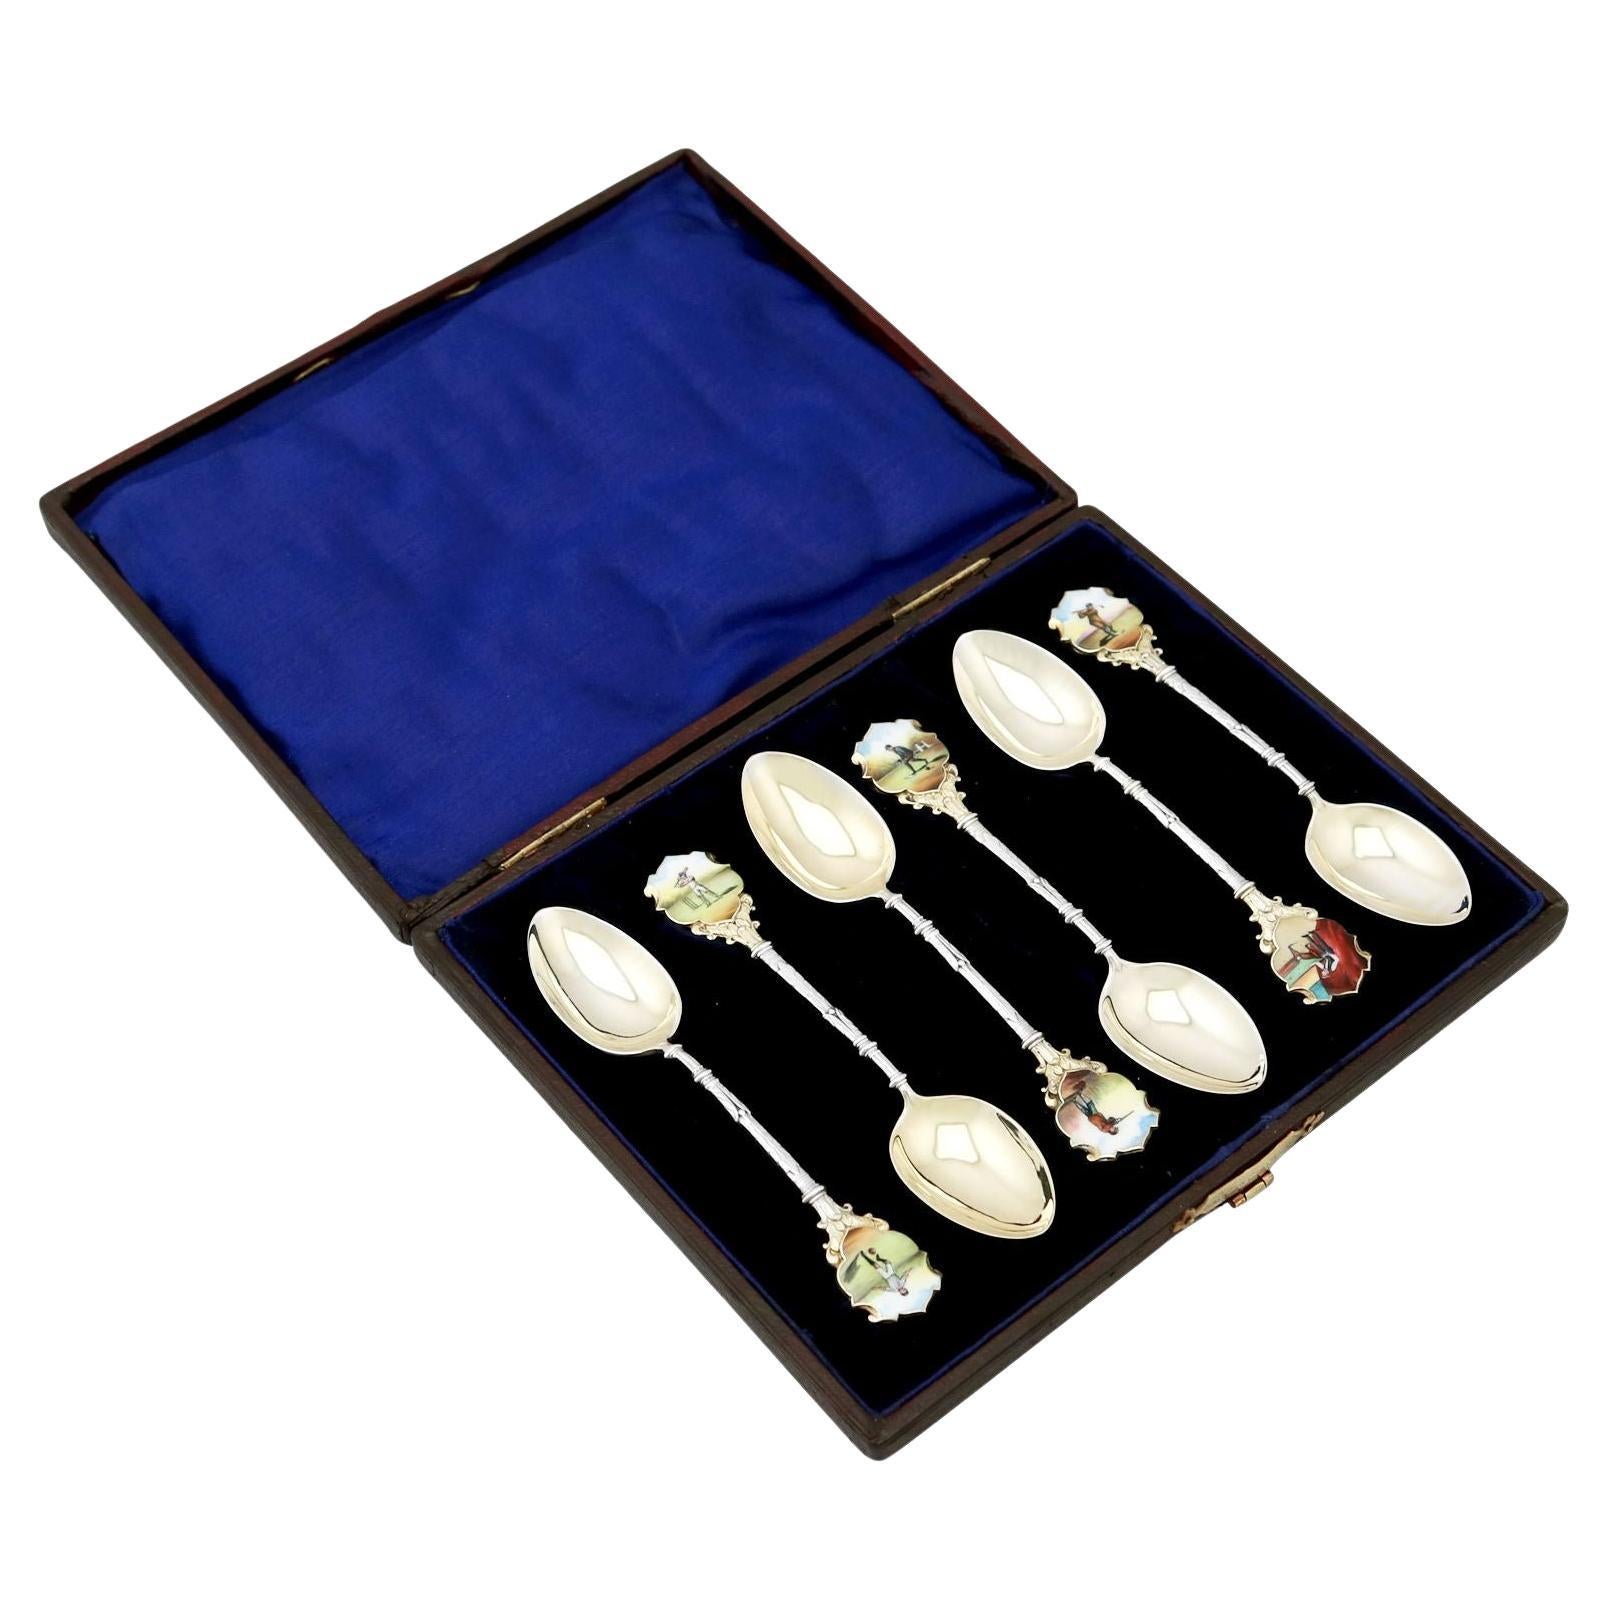 1900s, Edwardian Sterling Silver and Enamel Spoons